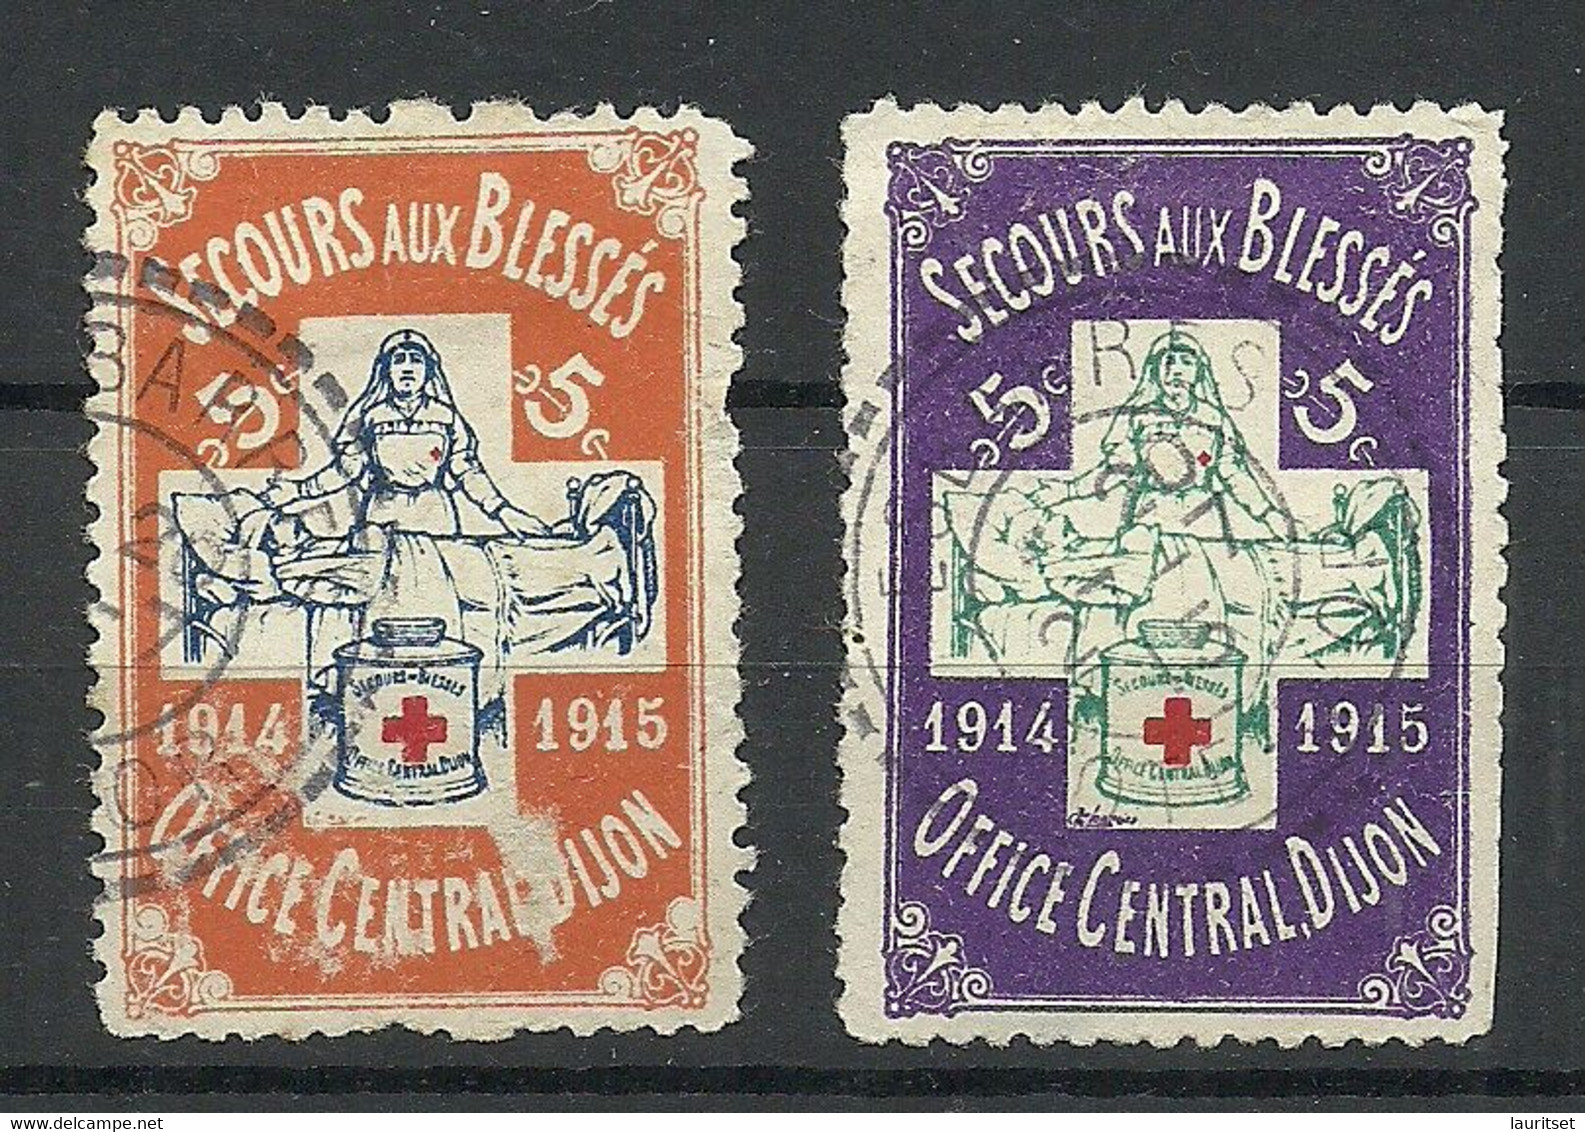 FRANCE 1914/1915 Secours Aux Blesses Office Central Dijon Red Cross Vignettes Advertising Stamps O NB! Faults! - Rotes Kreuz